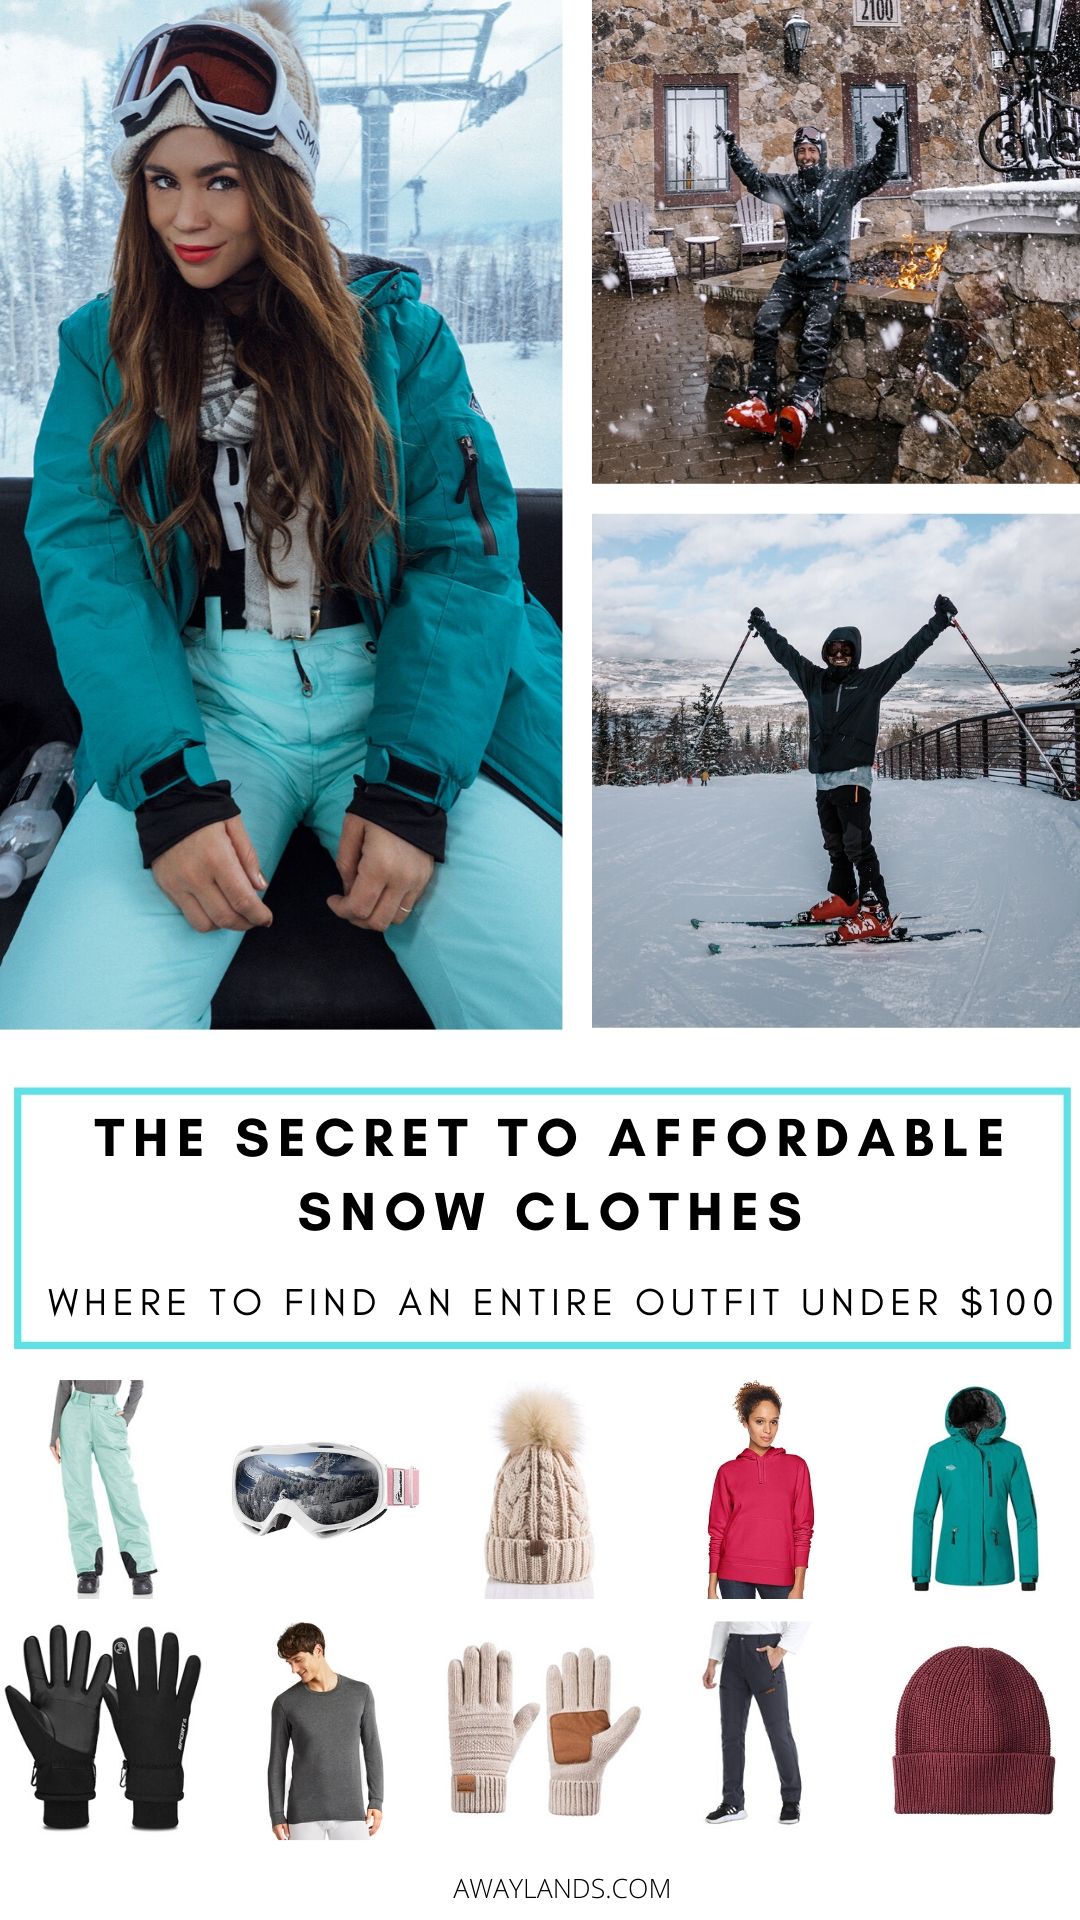 Need Affordable Snow Clothes? How to Get a Complete Ski Outfit for